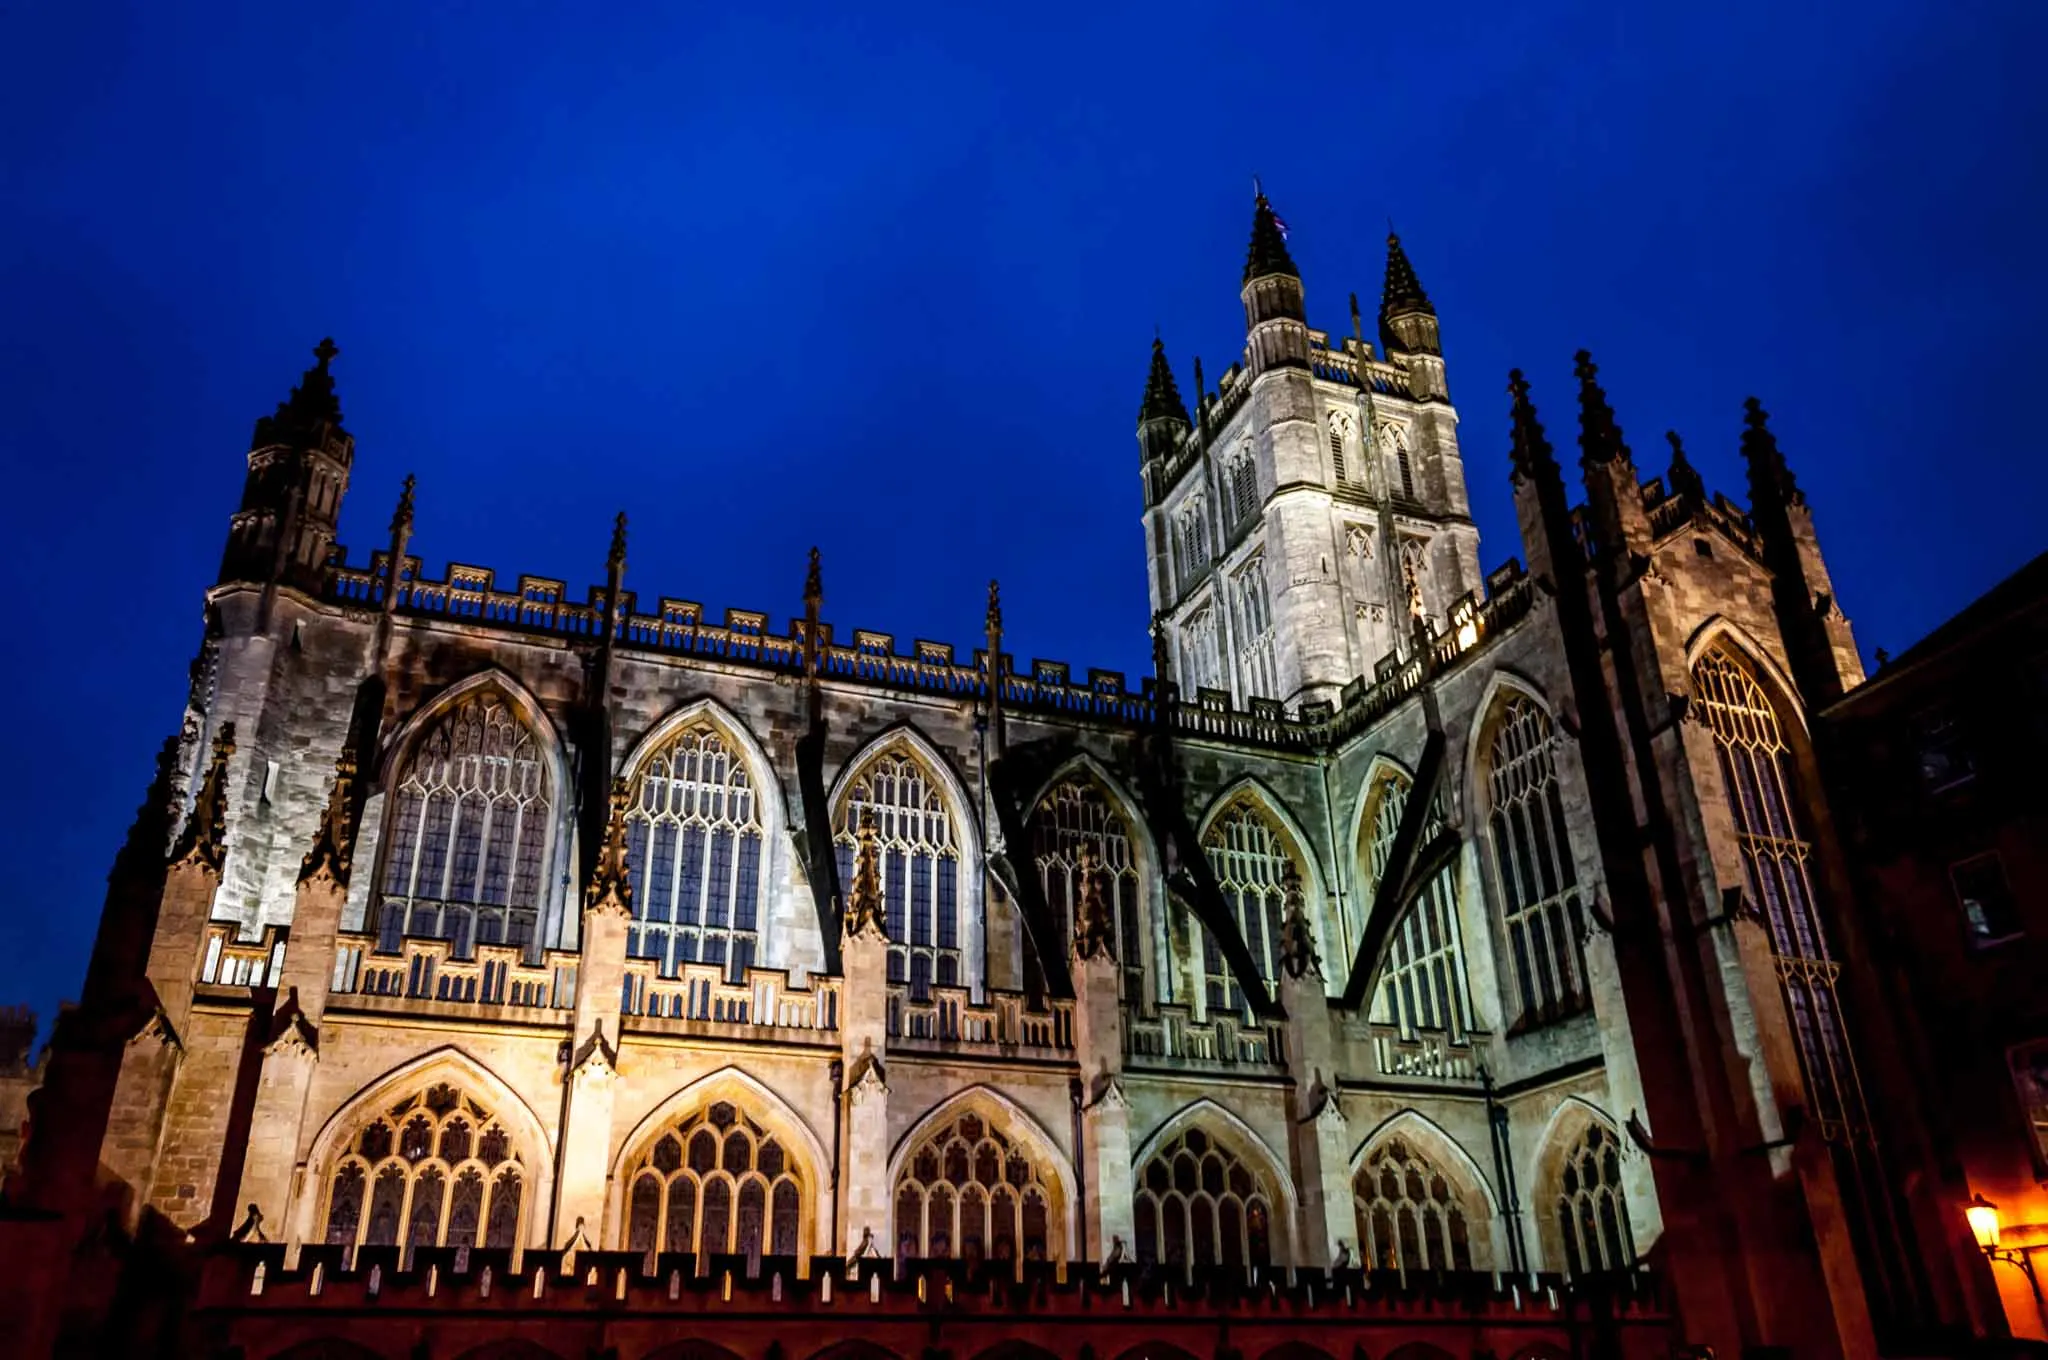 Gothic cathedral lit in colorful lights at night, the Bath Abbey